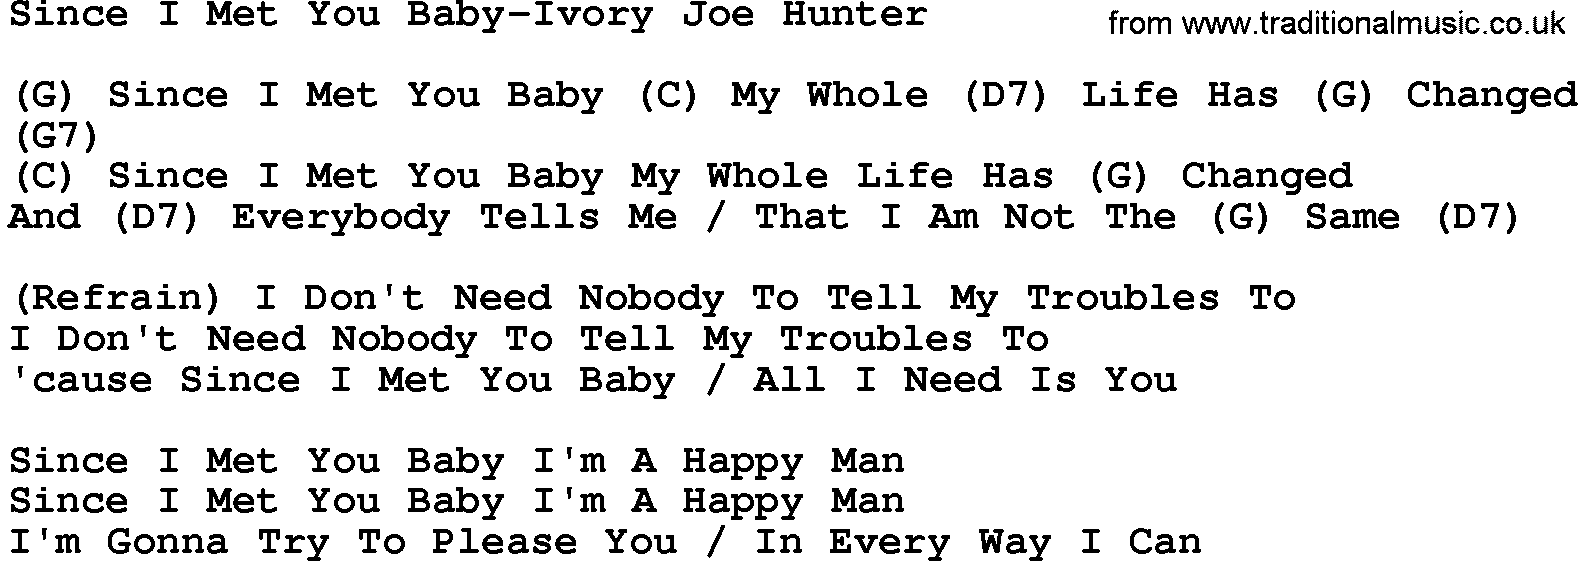 Country music song: Since I Met You Baby-Ivory Joe Hunter lyrics and chords